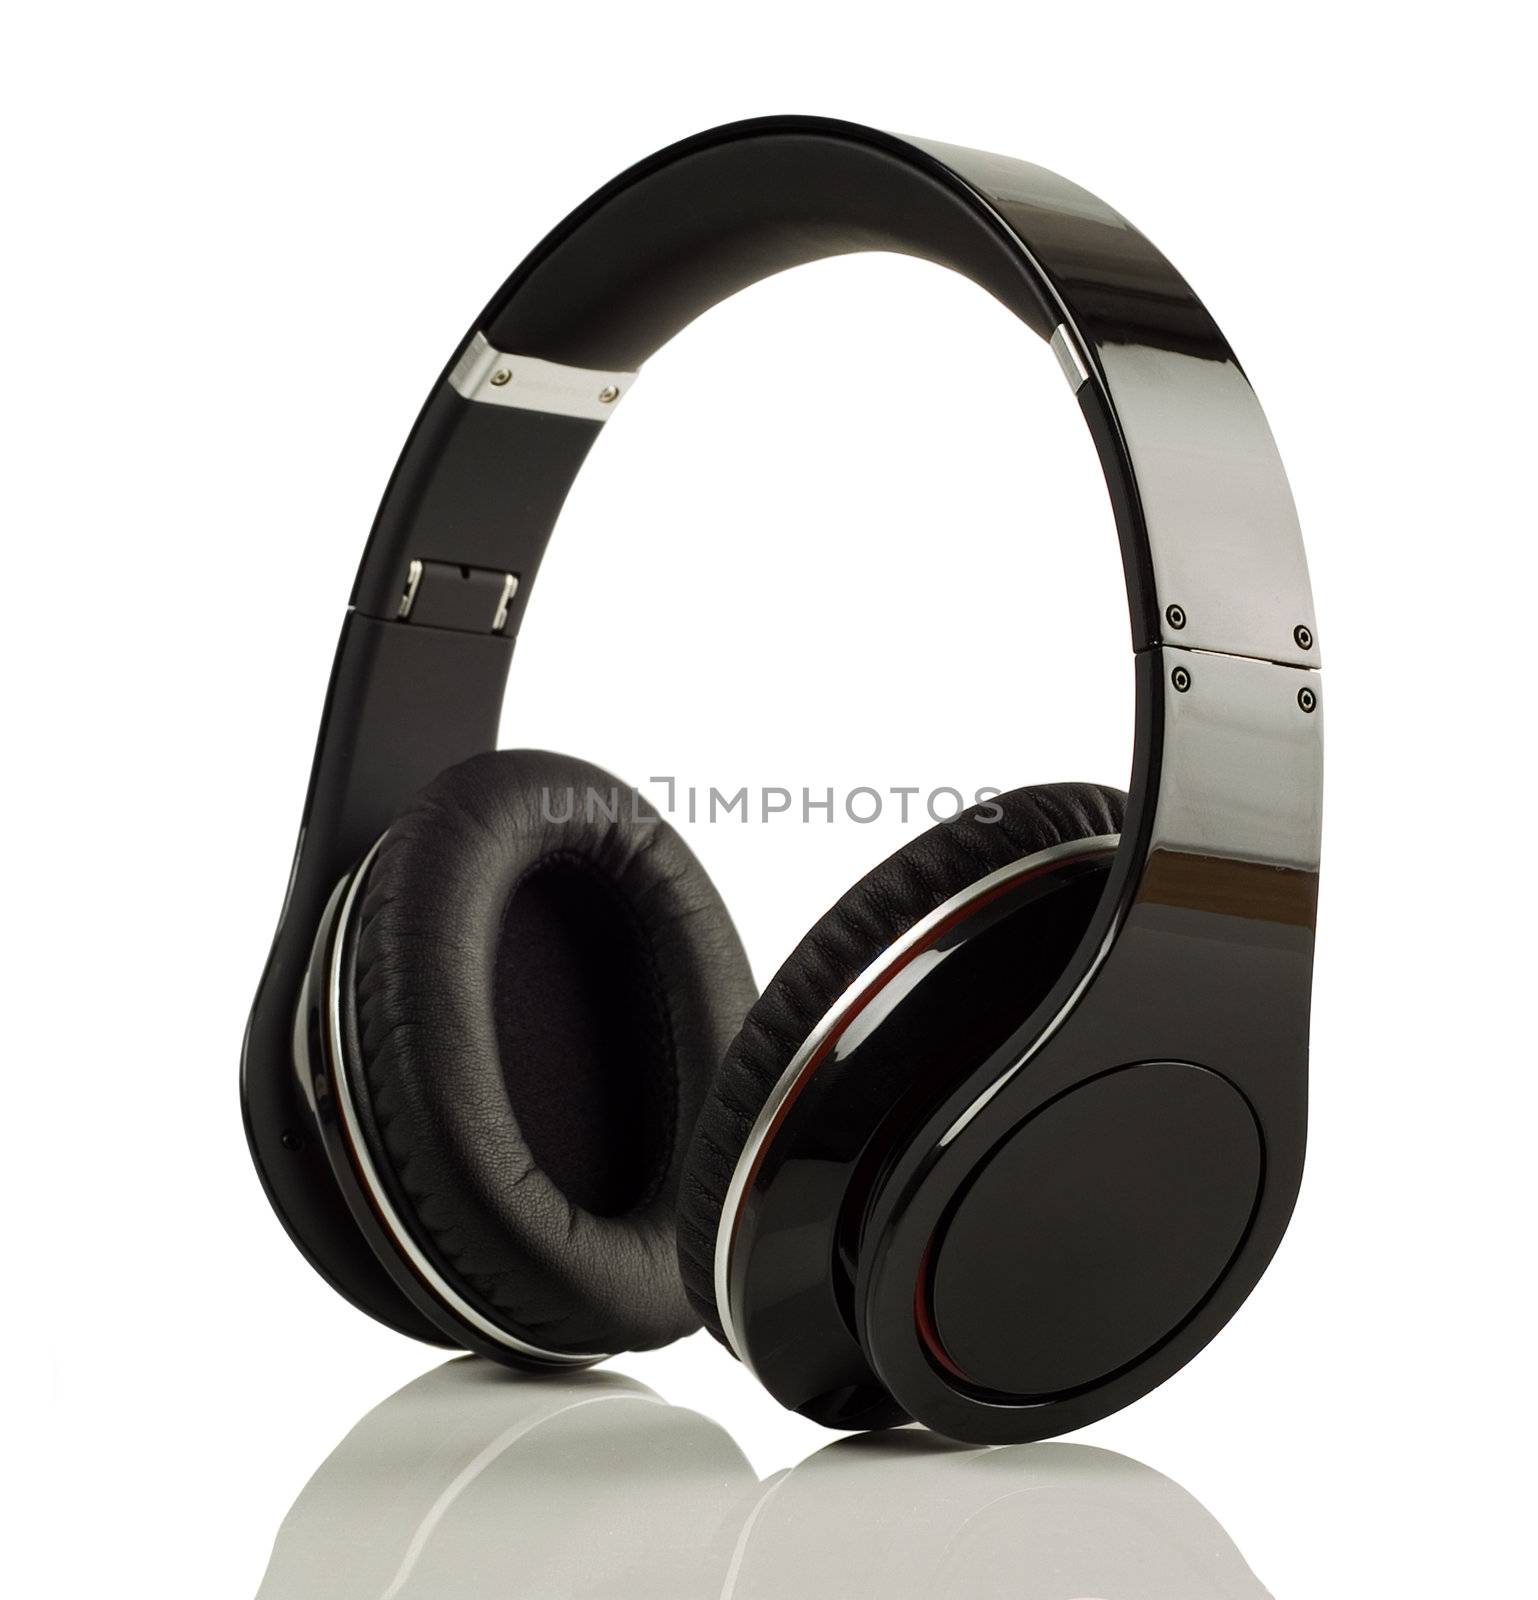 Modern music headphones on white by alistaircotton